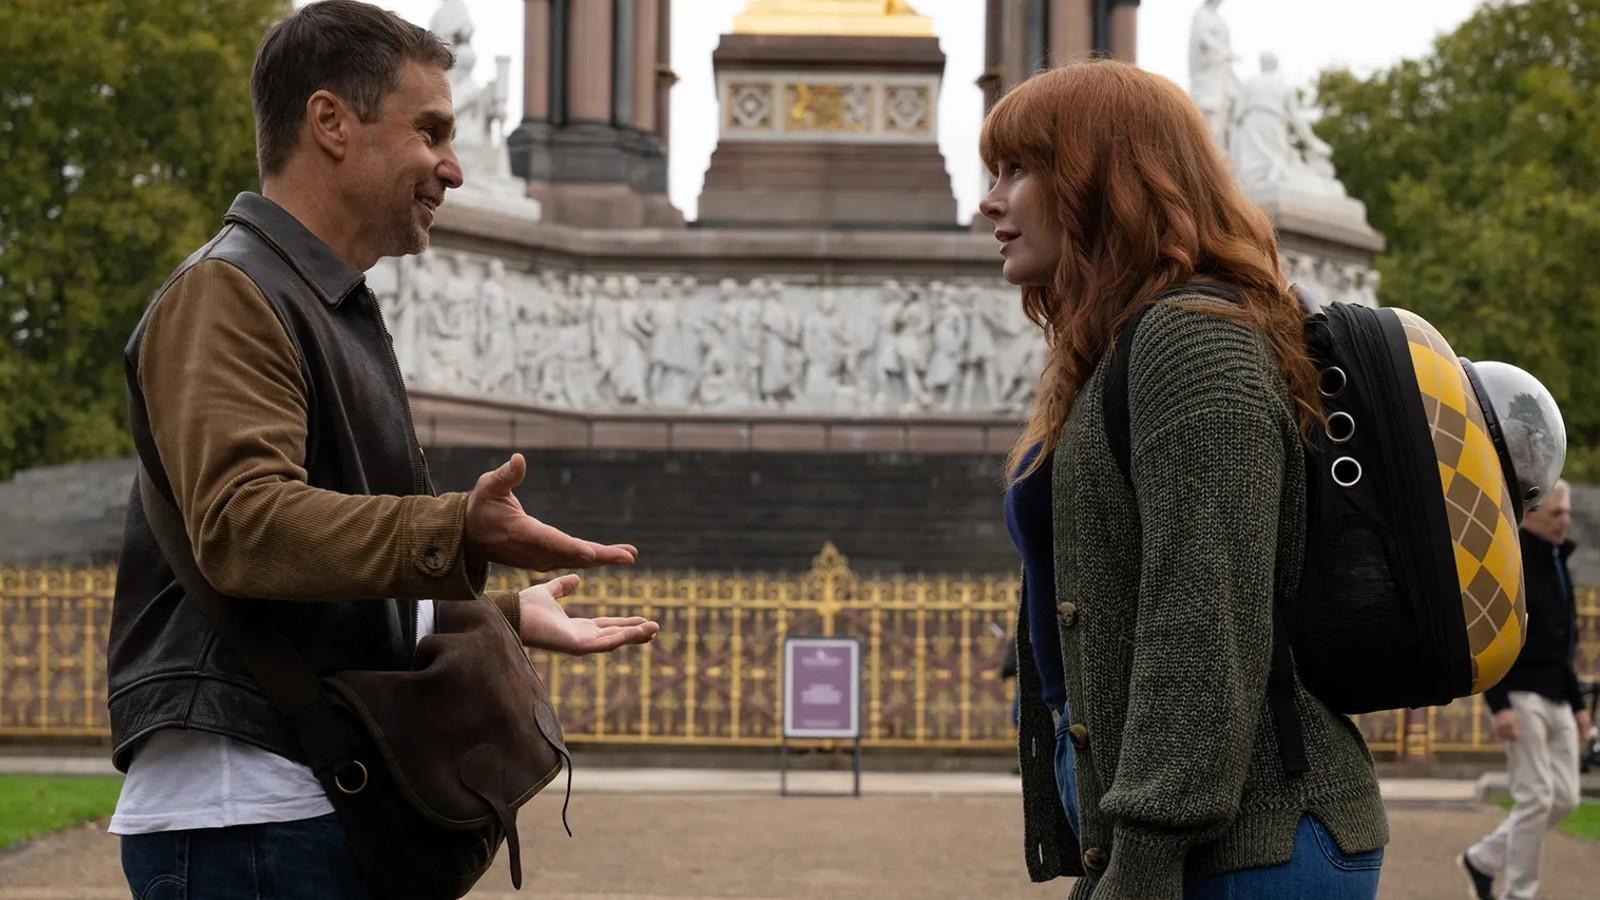 Sam Rockwell and Bryce Dallas Howard looking at each other in Argylle.